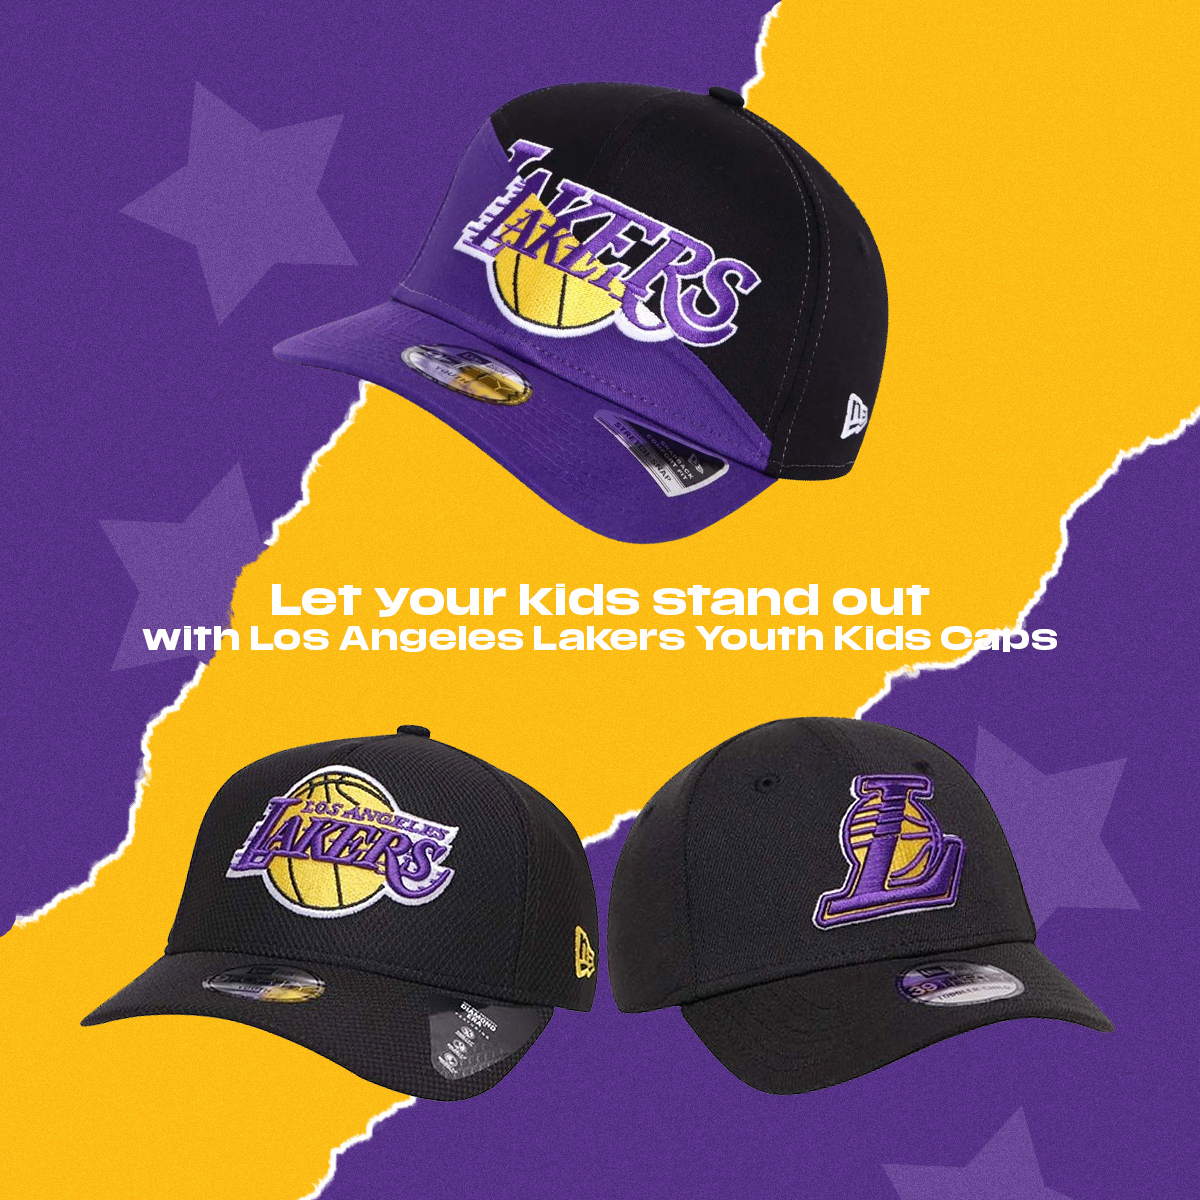 Relive the Glory with New Era's Lakers NBA Champions Cap